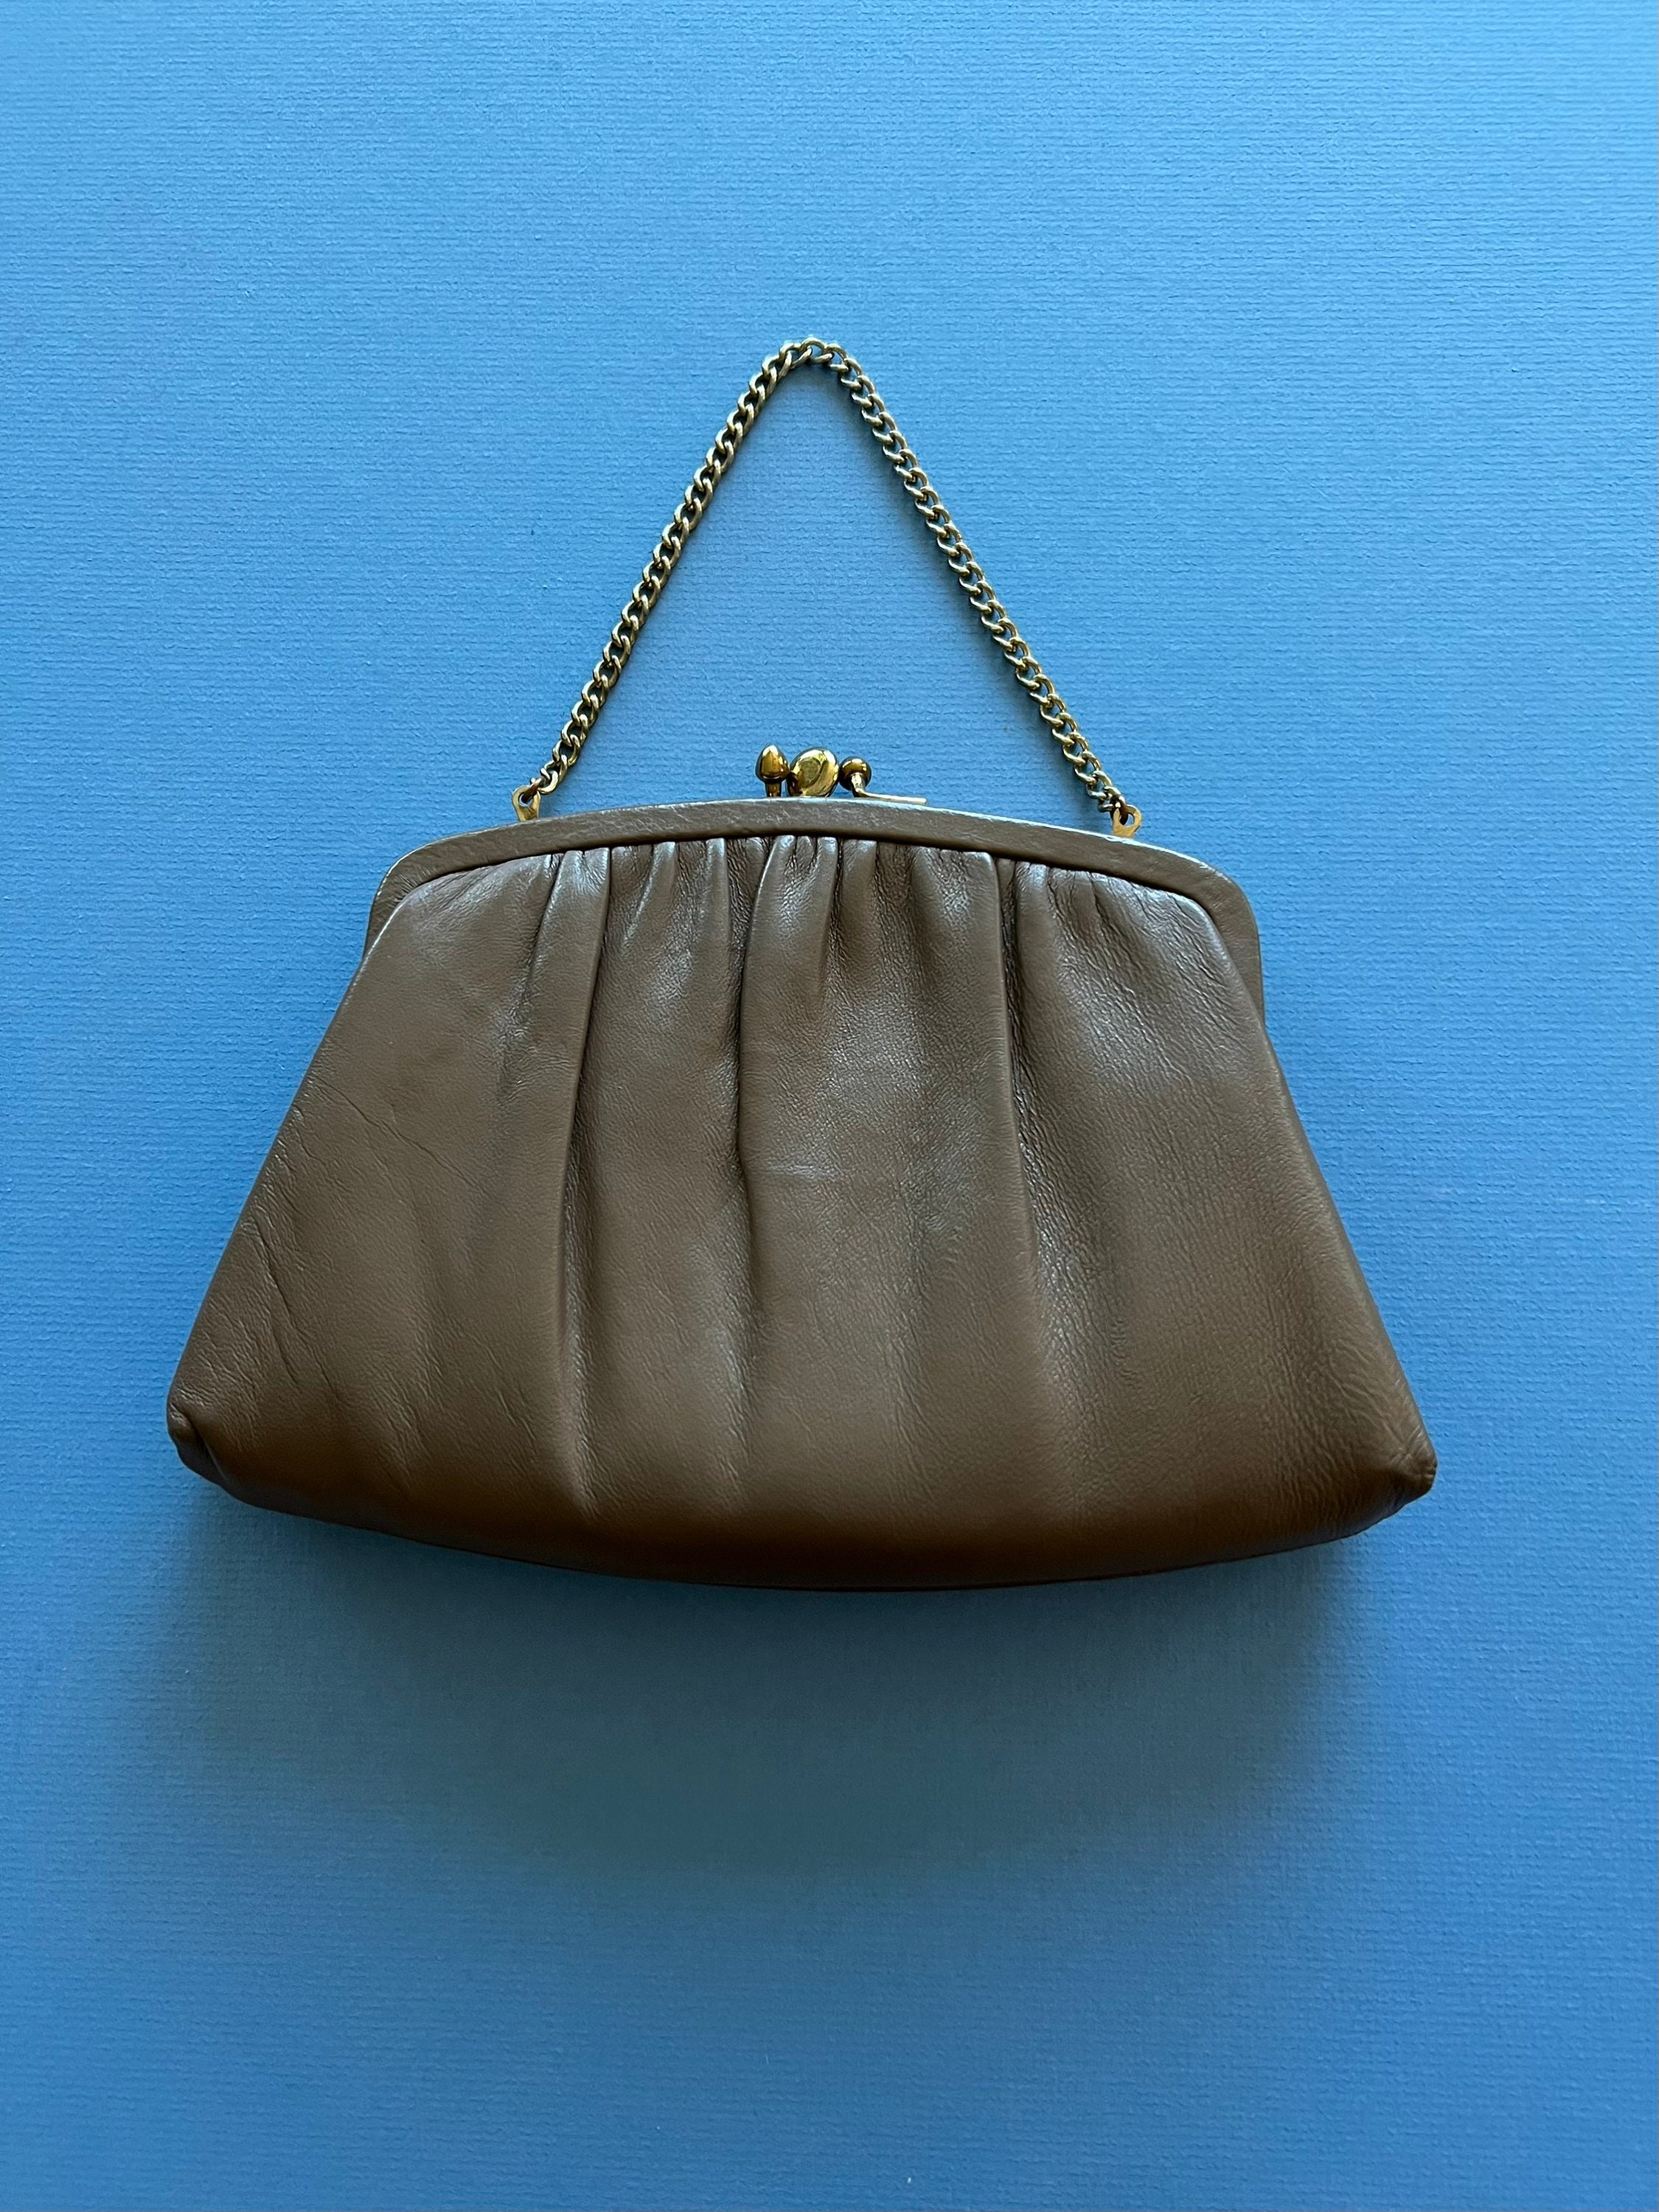 Ora Delphine Taupe Brown Leather Beach Ball Pouch Wristlet Clutch